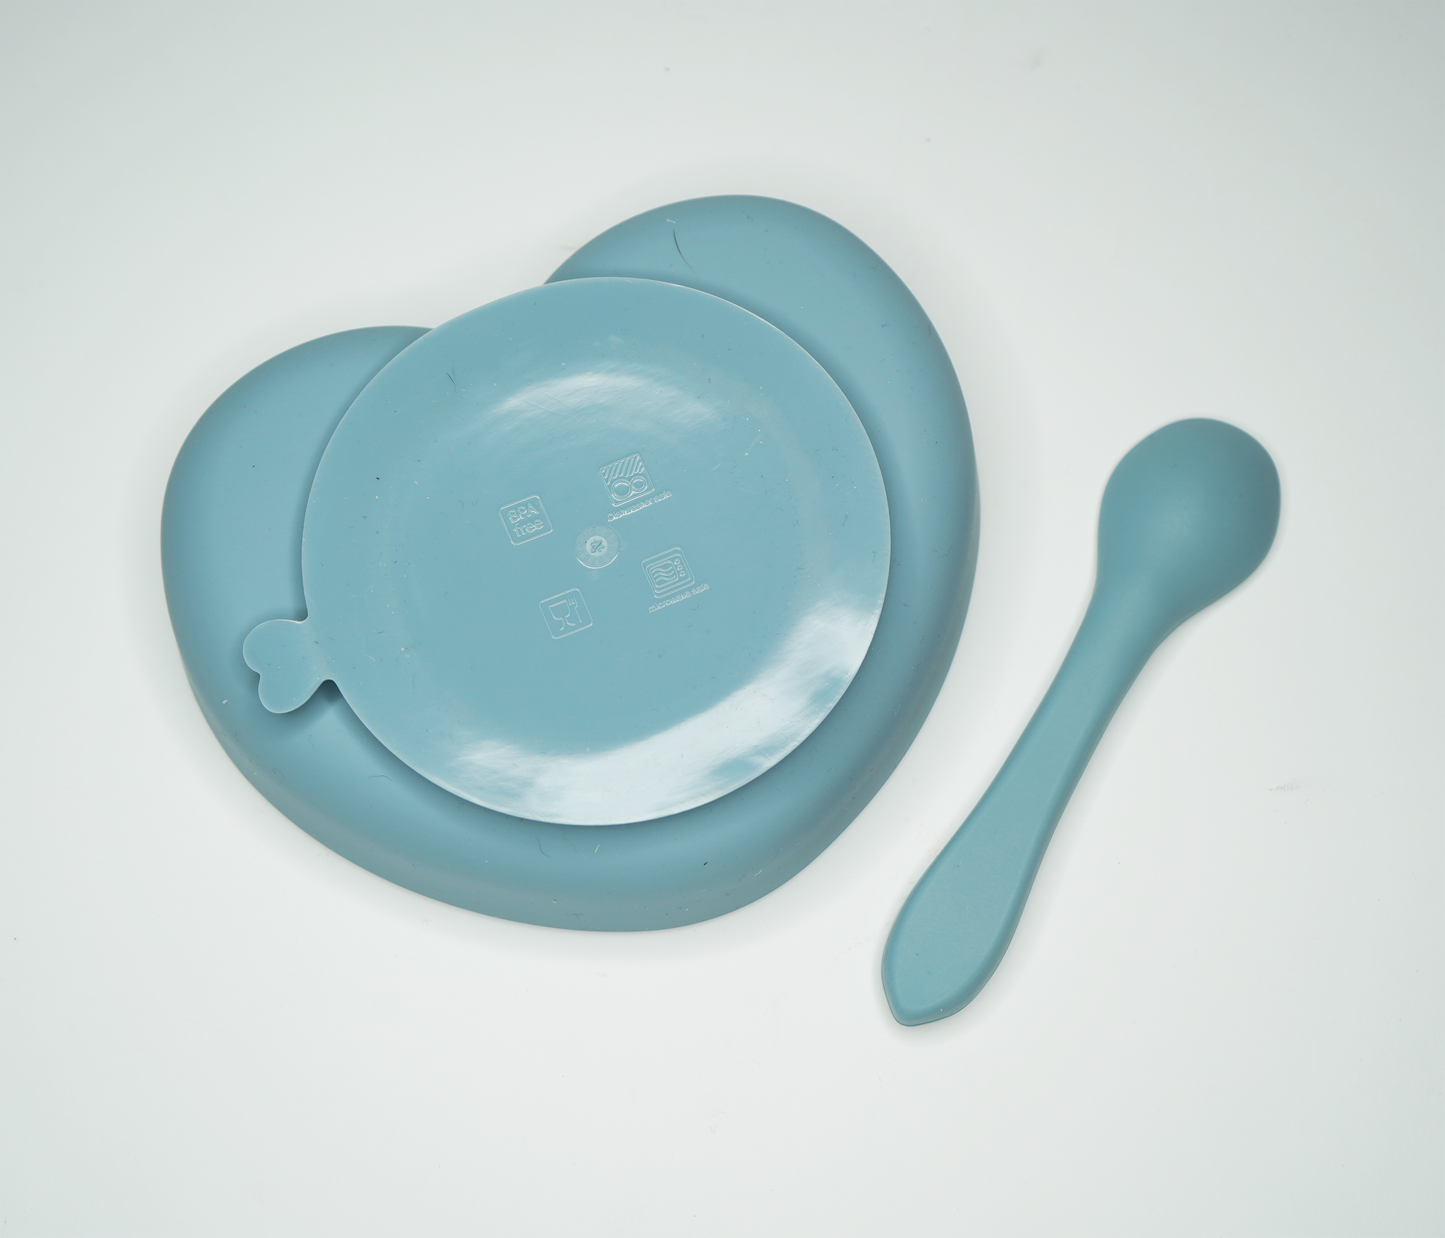 Heart Shaped silicone baby bowl with suction and matching spoon